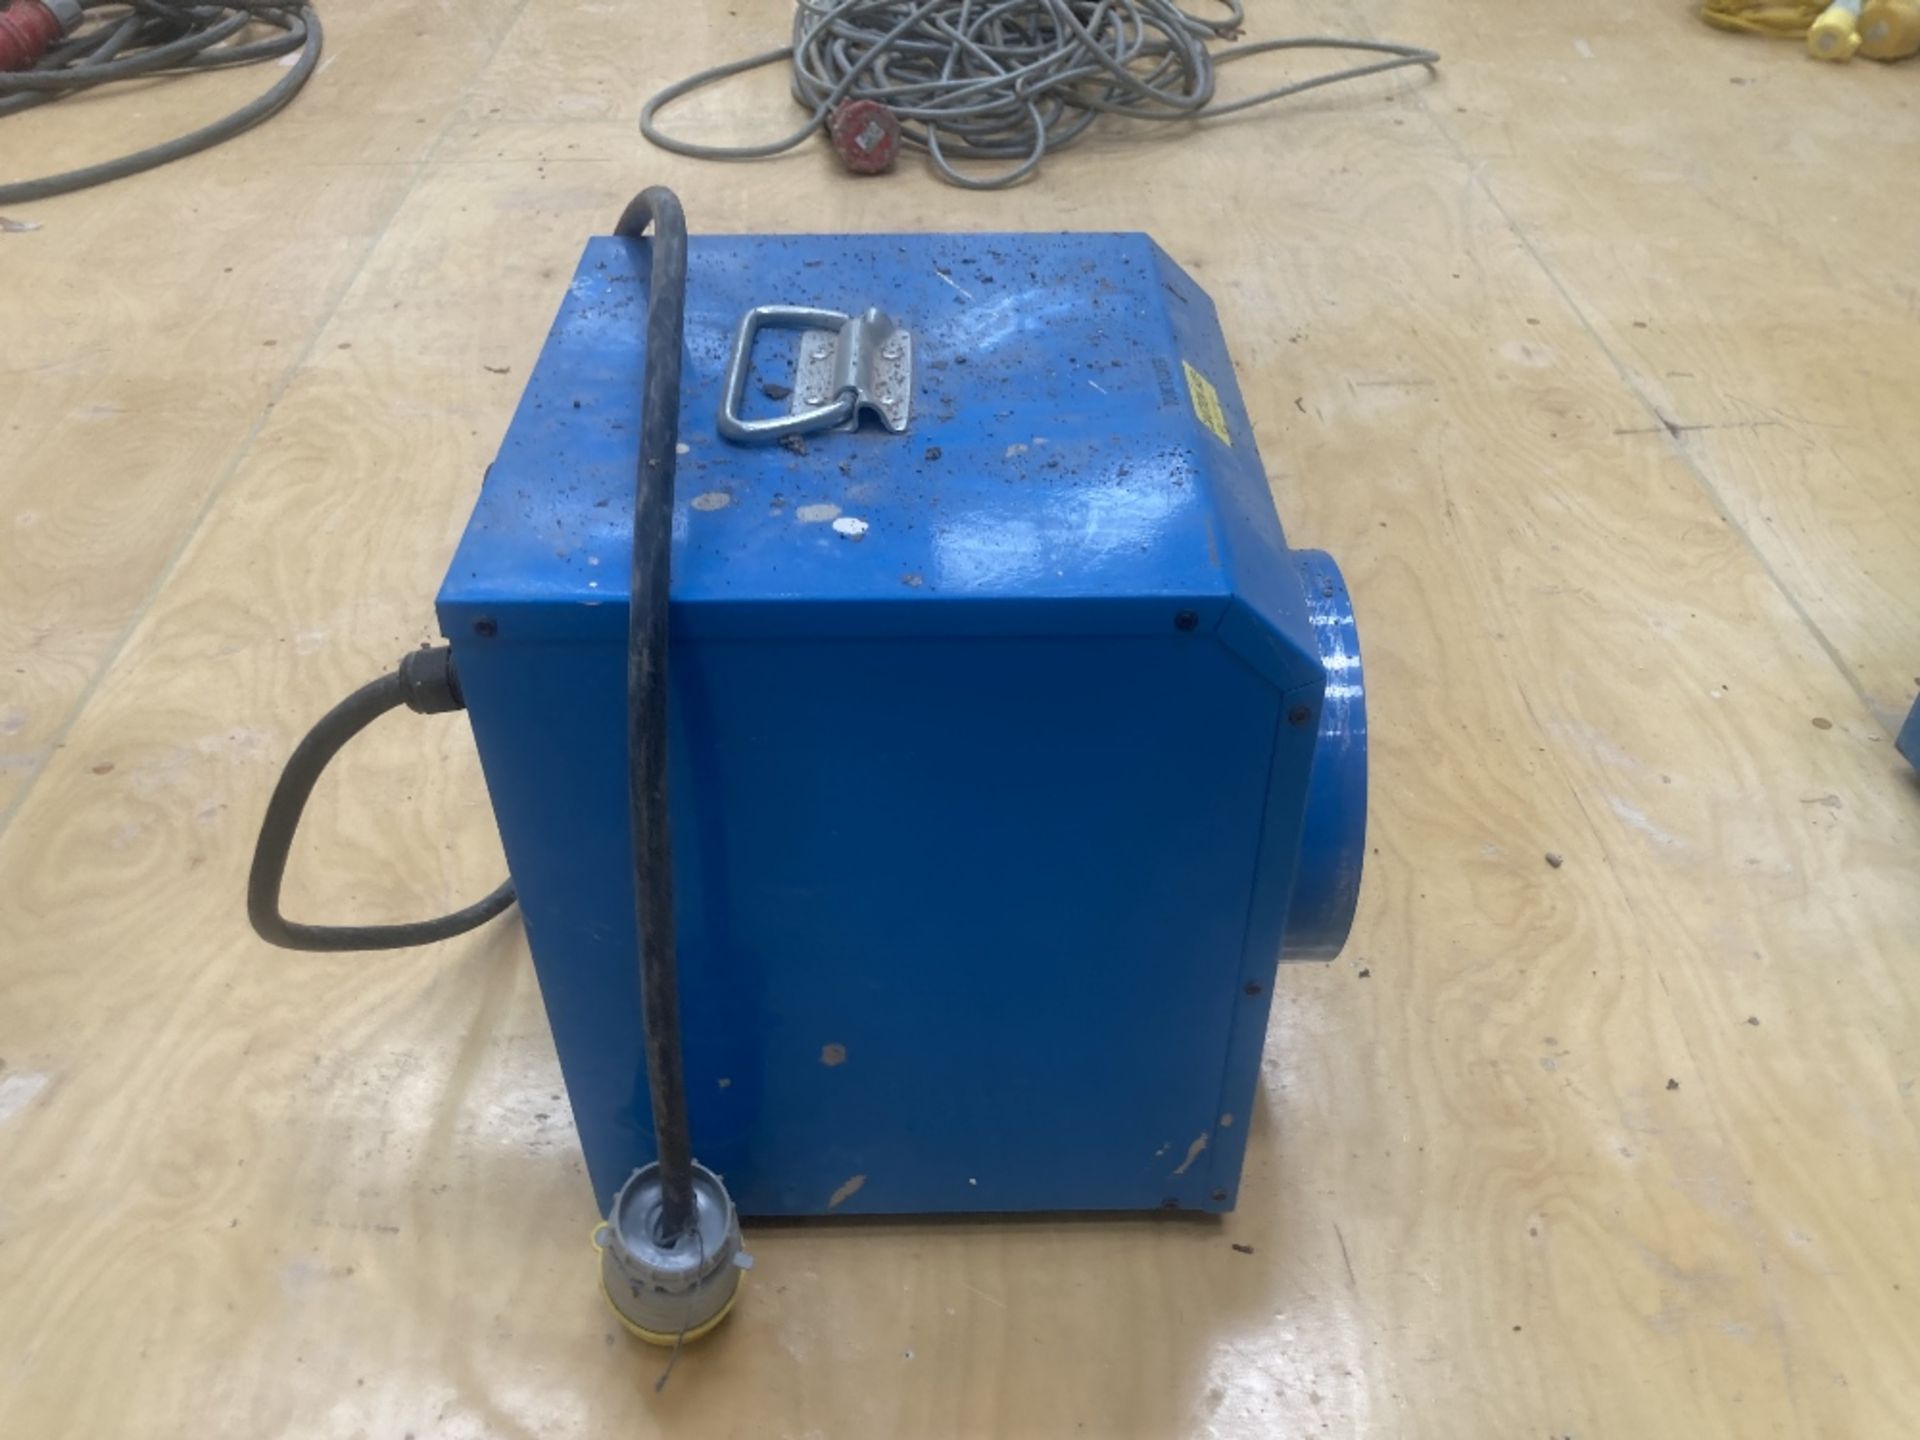 Broughton 110v Industrial Fan Heater - Image 3 of 5